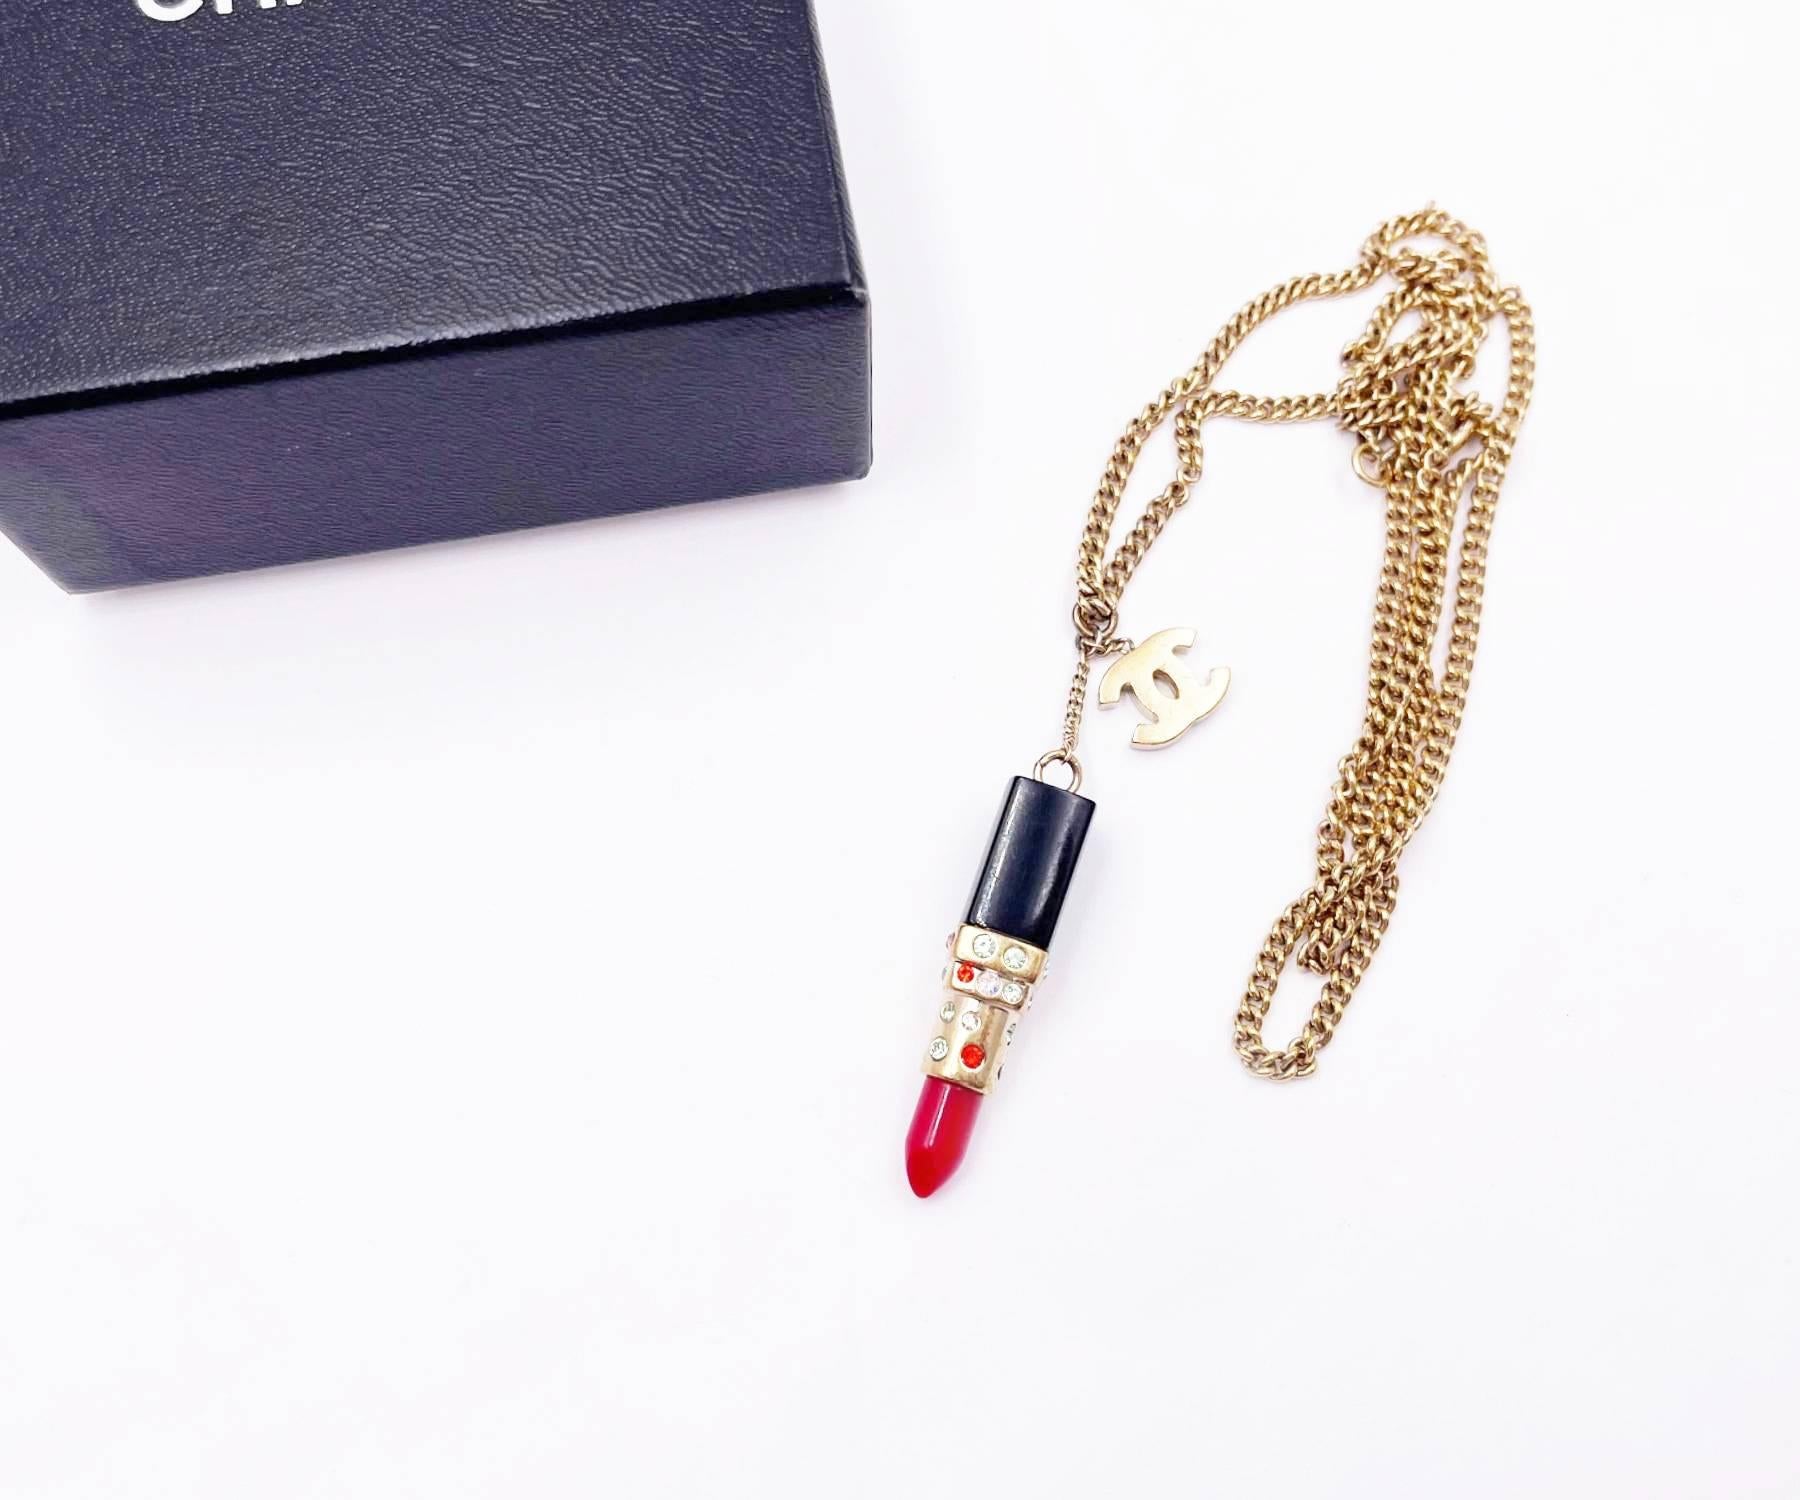 Chanel Rare Vintage Gold Plated CC Large Red Lipstick Pendant Necklace

* Marked 05
* Made in Italy
* Comes with original box

-The pendant is approximately 2.25″ x 0.4″.
-The chain is approximately 24″.
-Very rare and pretty design
-The metal shows